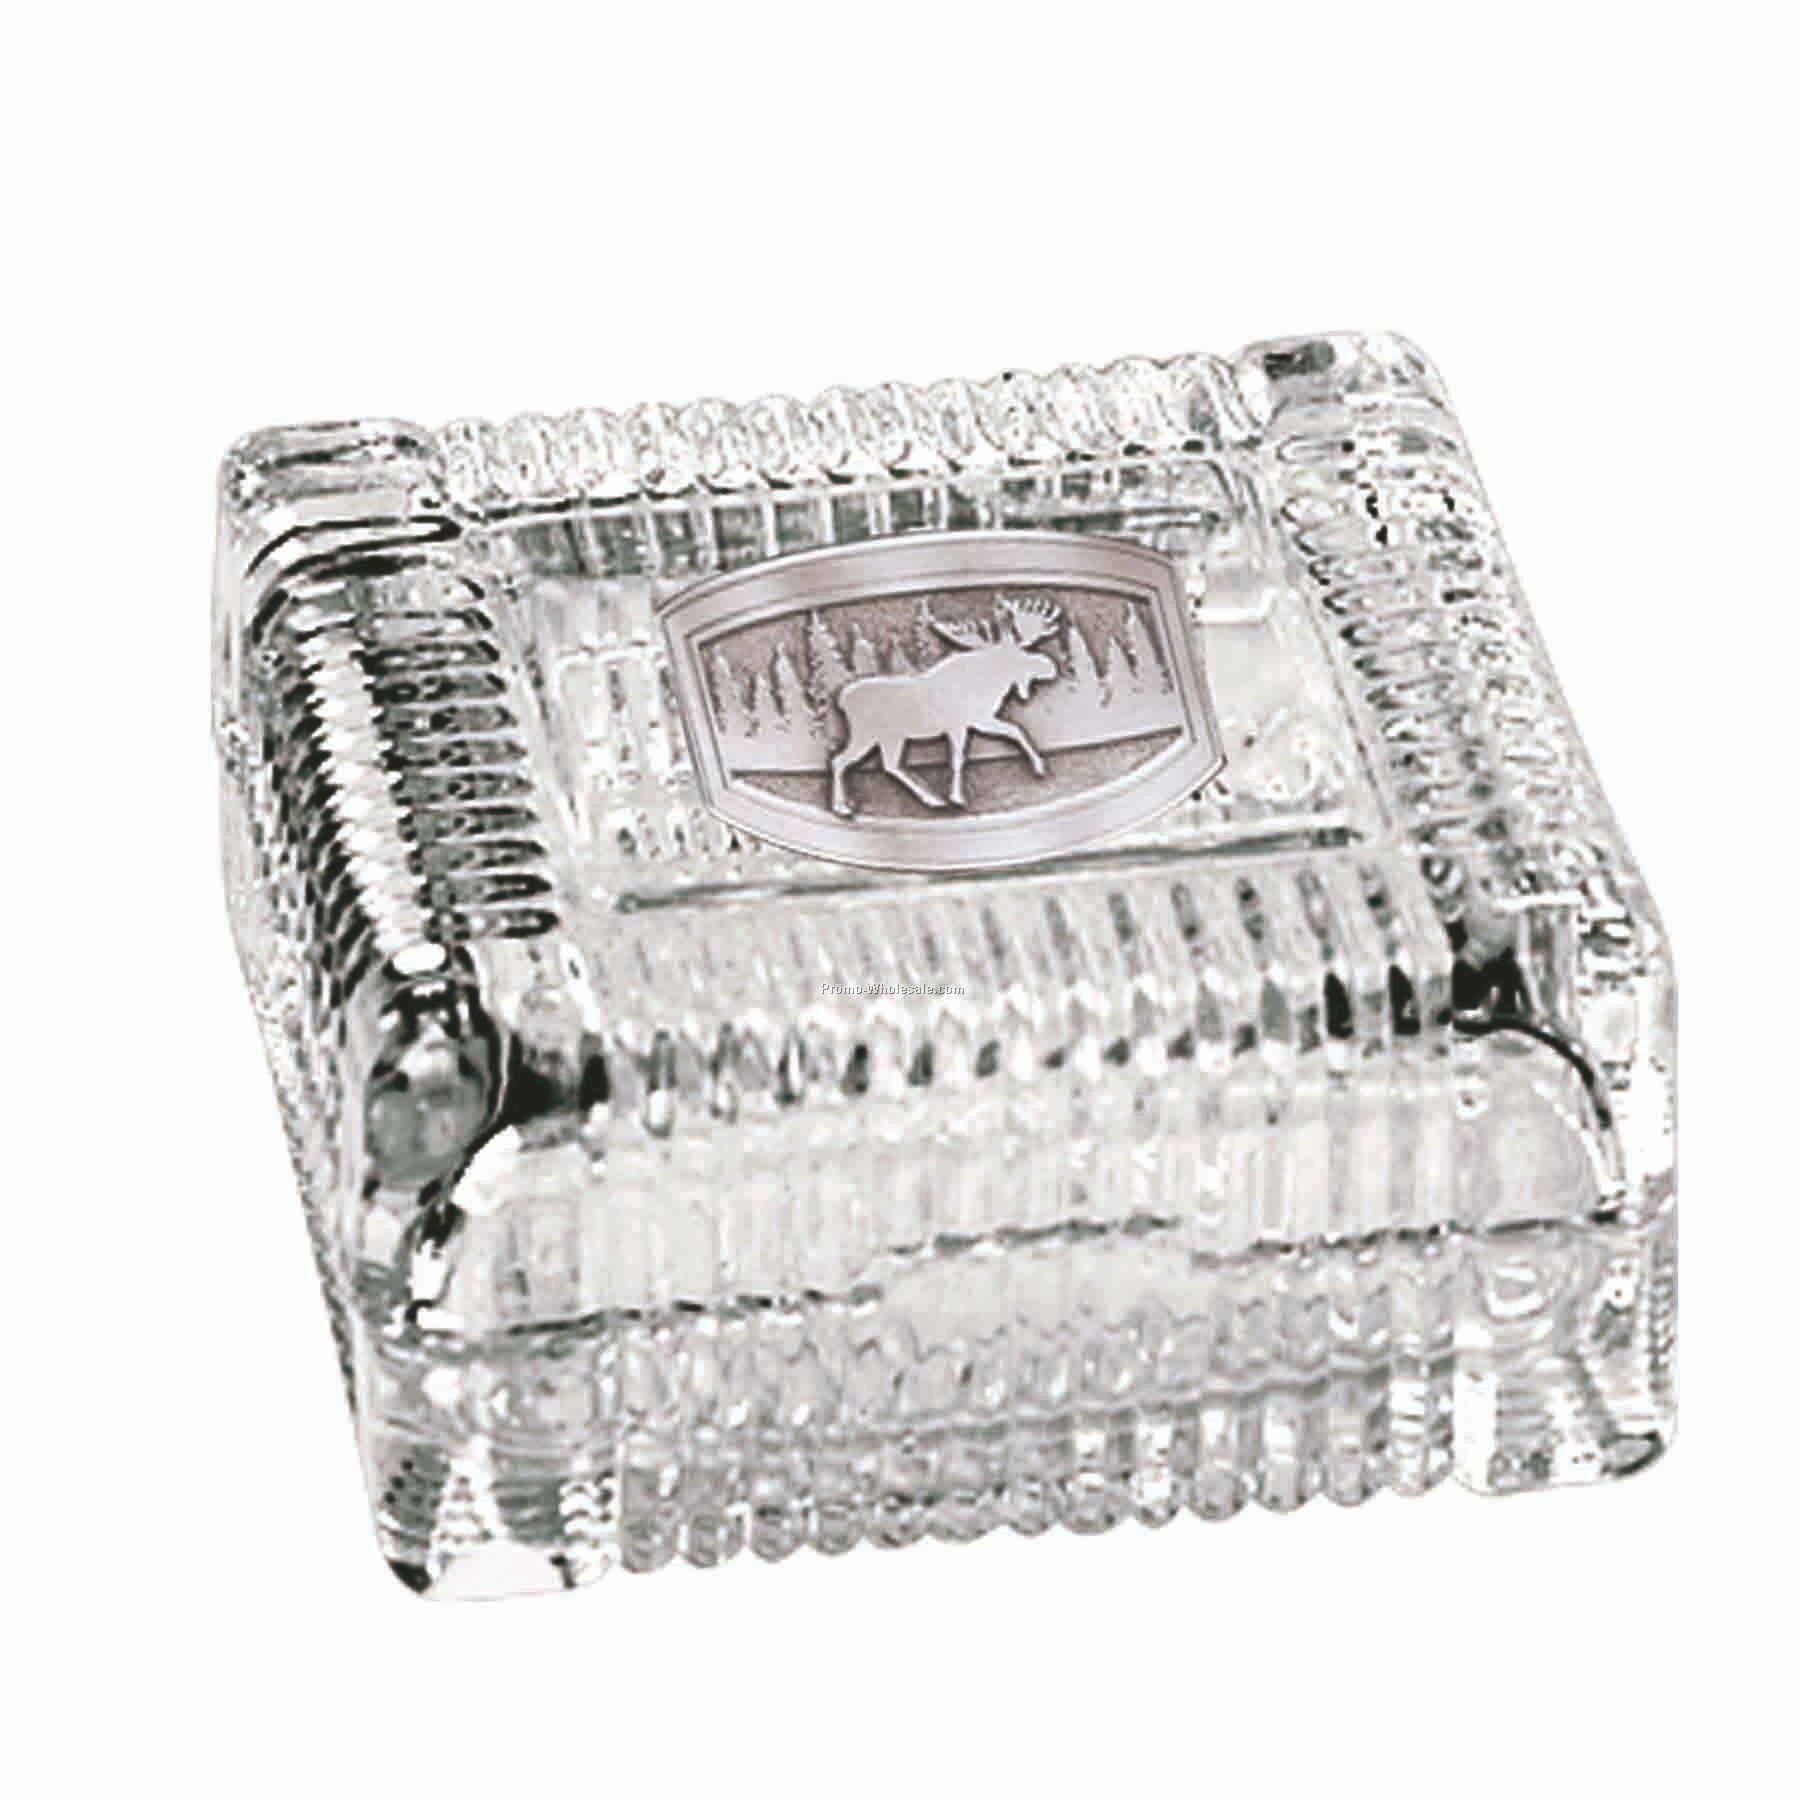 3-7/8"x3-7/8" Square Optical Crystal Candy Dish (Pewter Emblem)